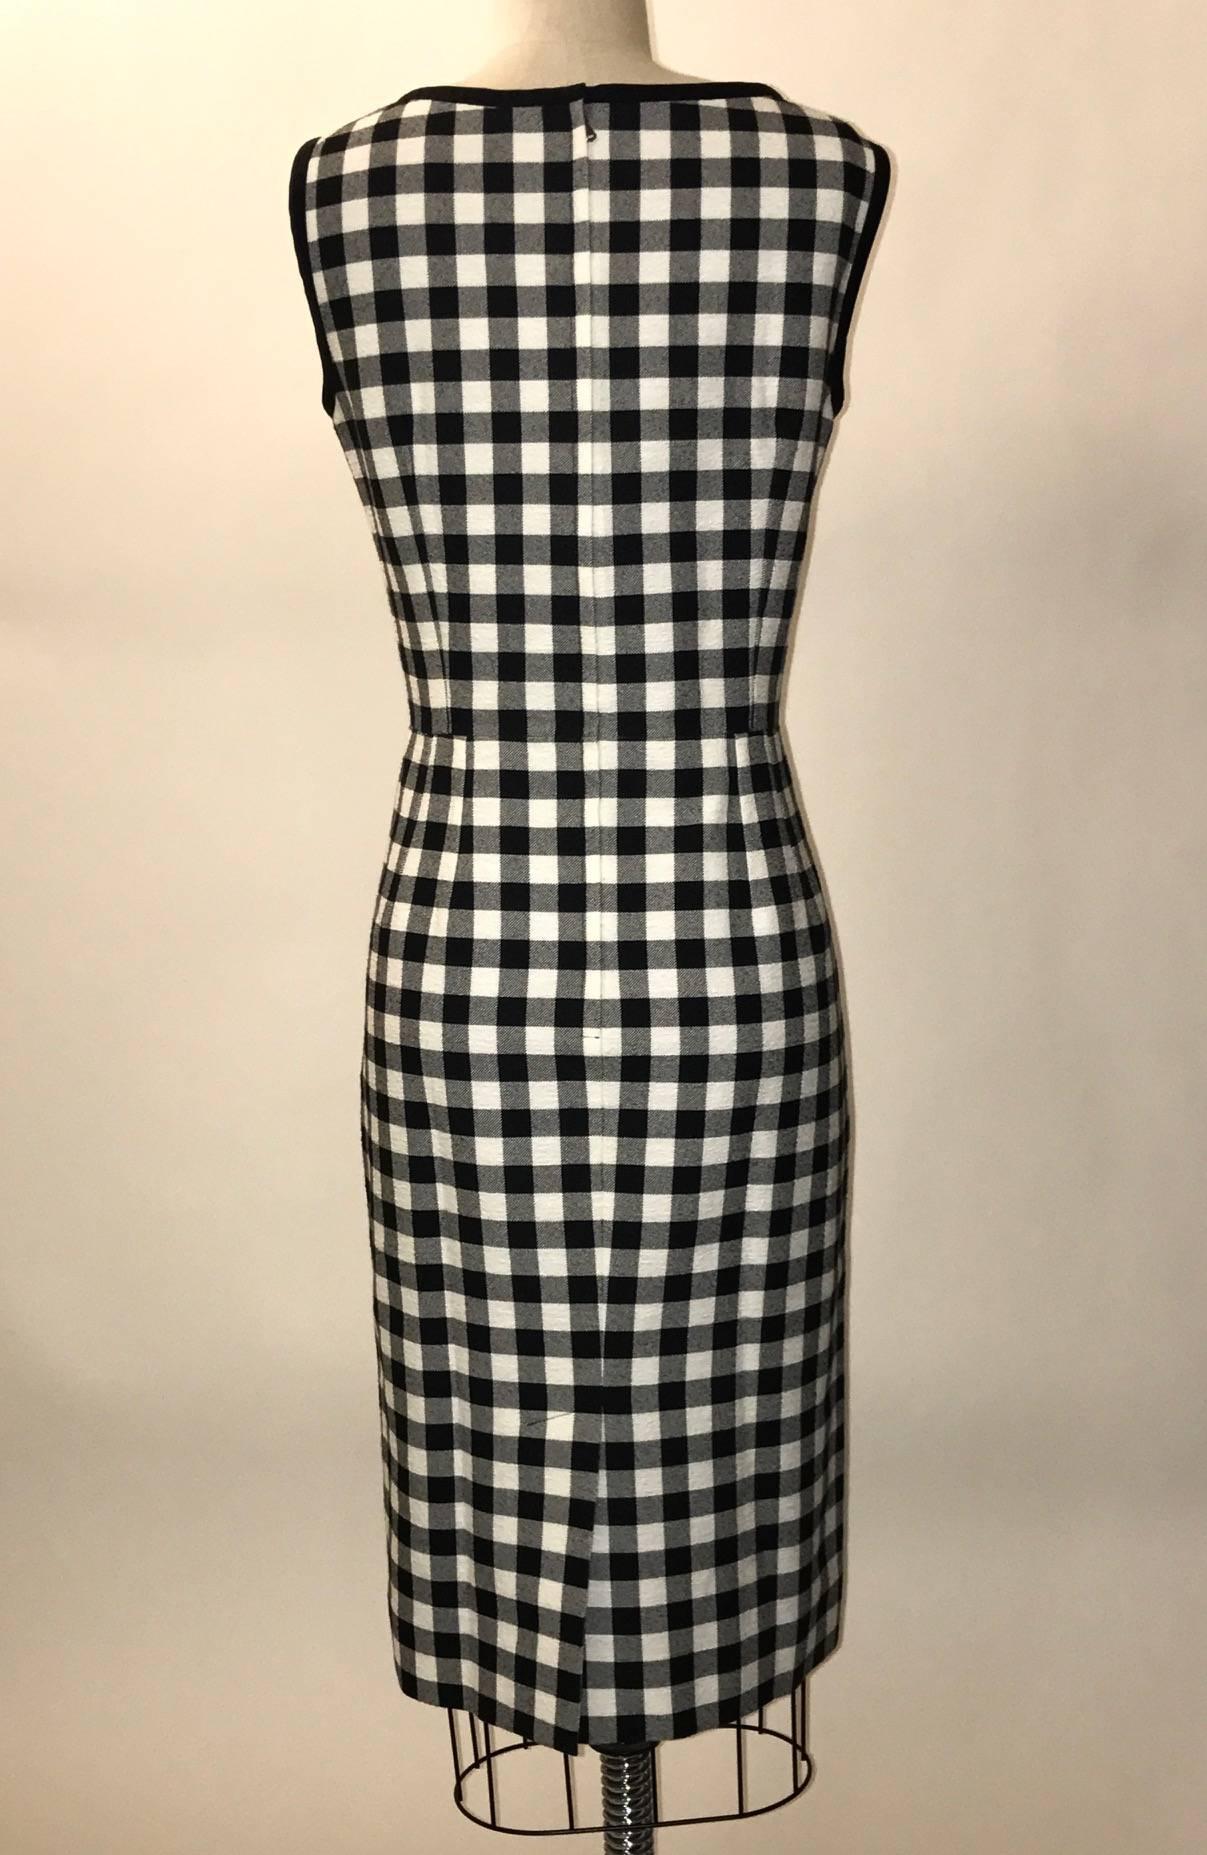 Dolce and Gabbana recent season black and white checked and slightly textured sleeveless pencil cut sheath dress. Back zip and hook and eye.

100% cotton.
Fully lined in 96% silk, 4% elastane.

Made in Italy.

Size IT 44, approximate US 8. See